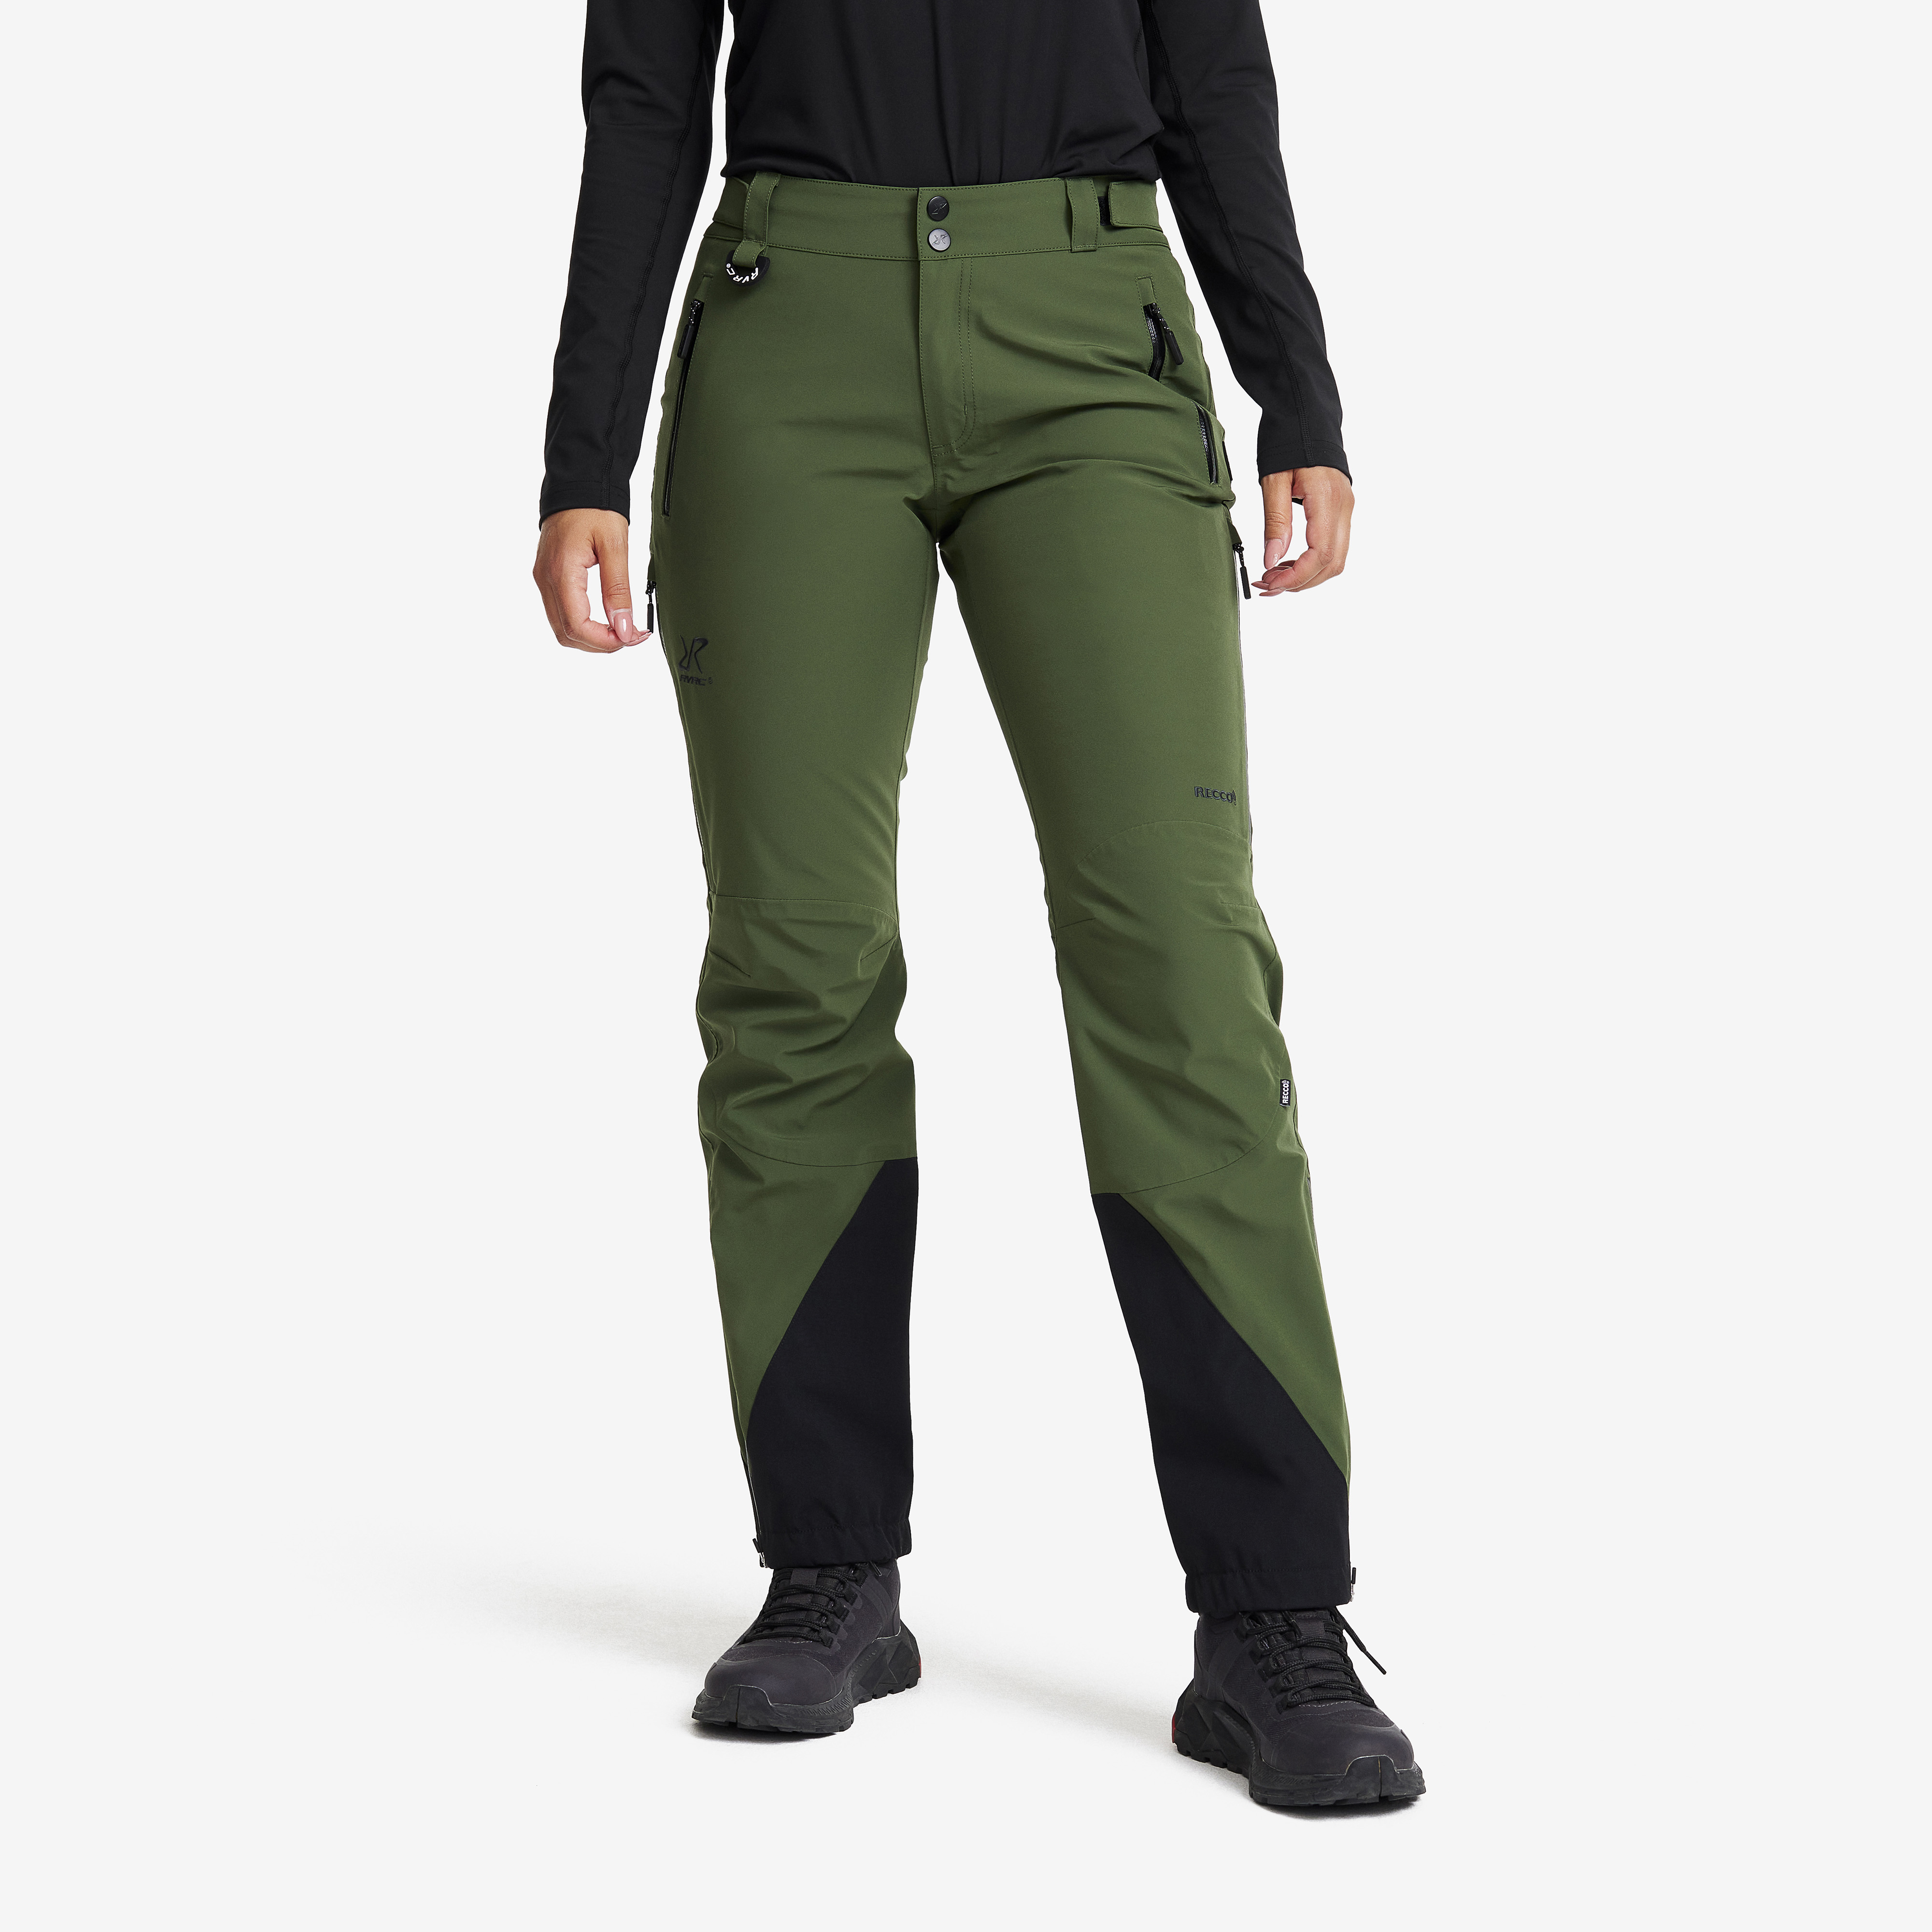 Cyclone Rescue Pants Black Forest Naiset